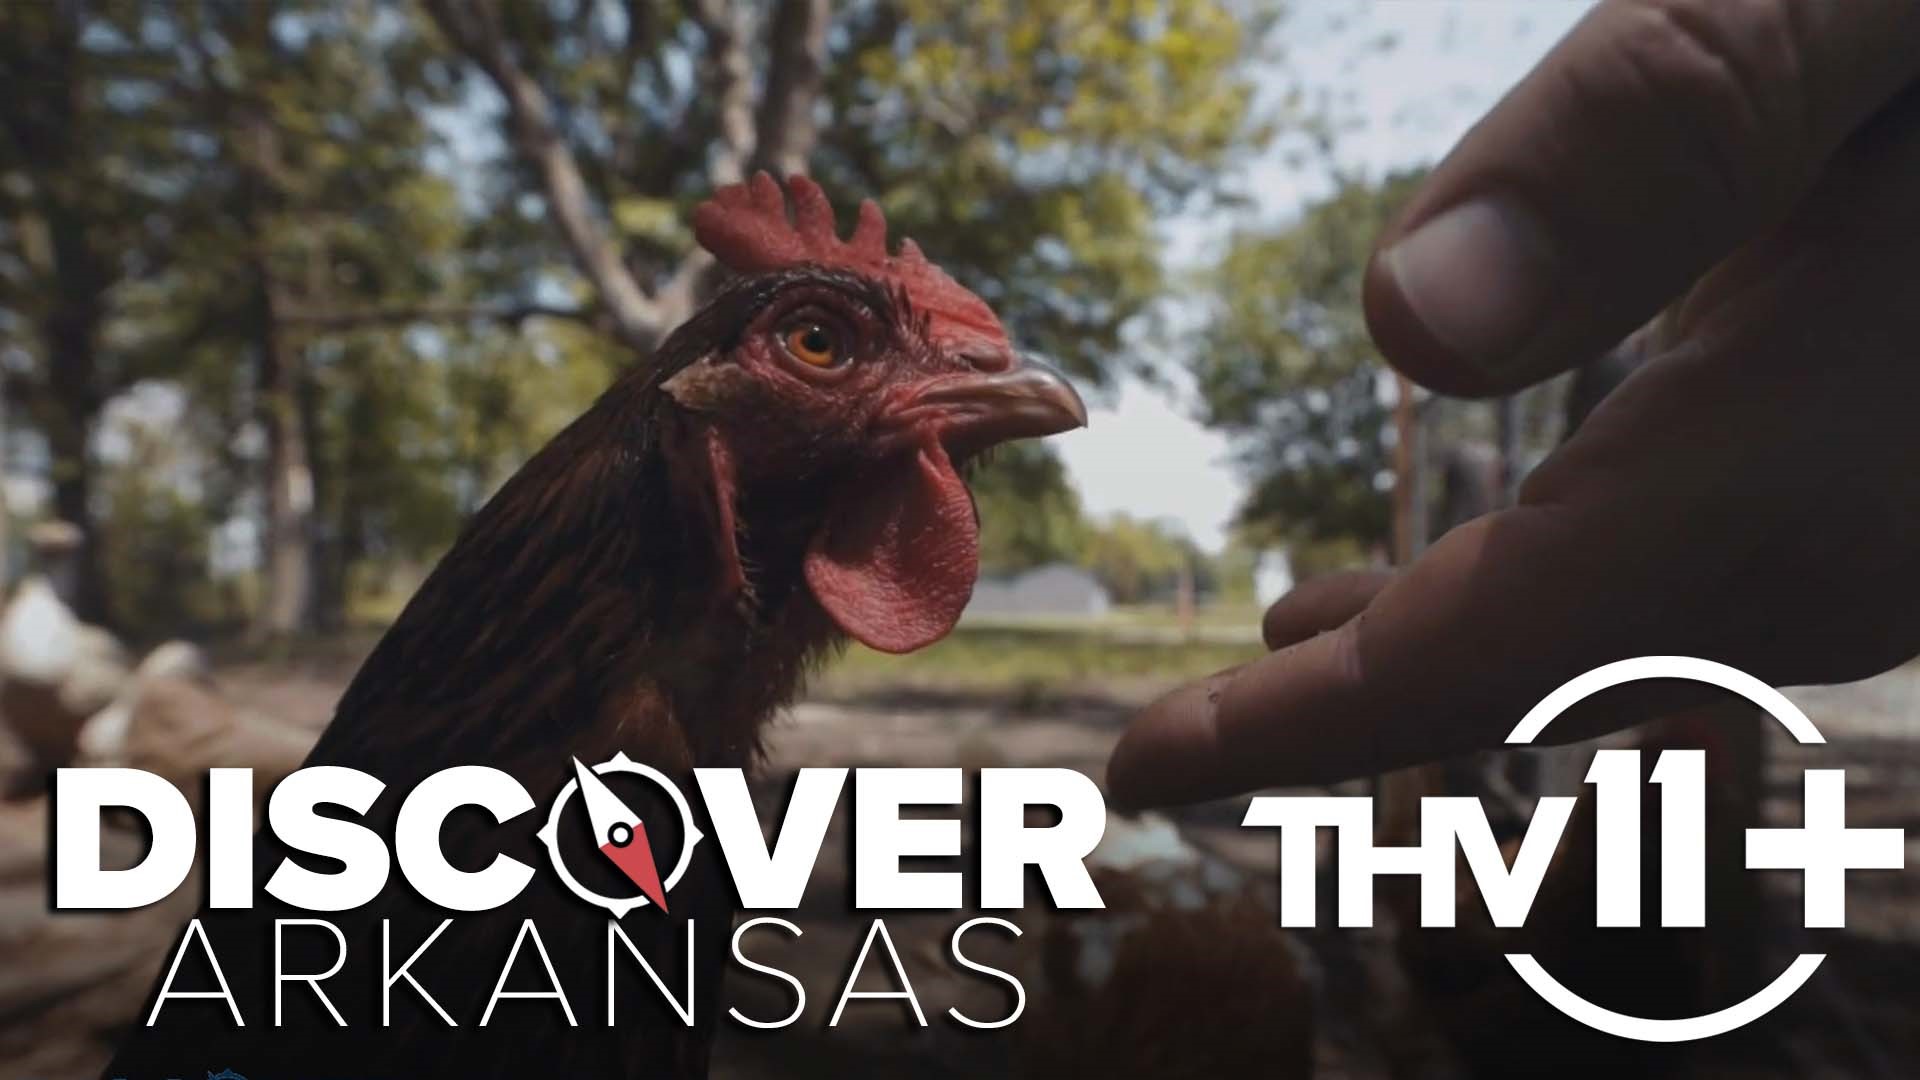 In this episode of Discover Arkansas, Ashley King and Adam Bledsoe take us to the best farms & markets in the Natural State.